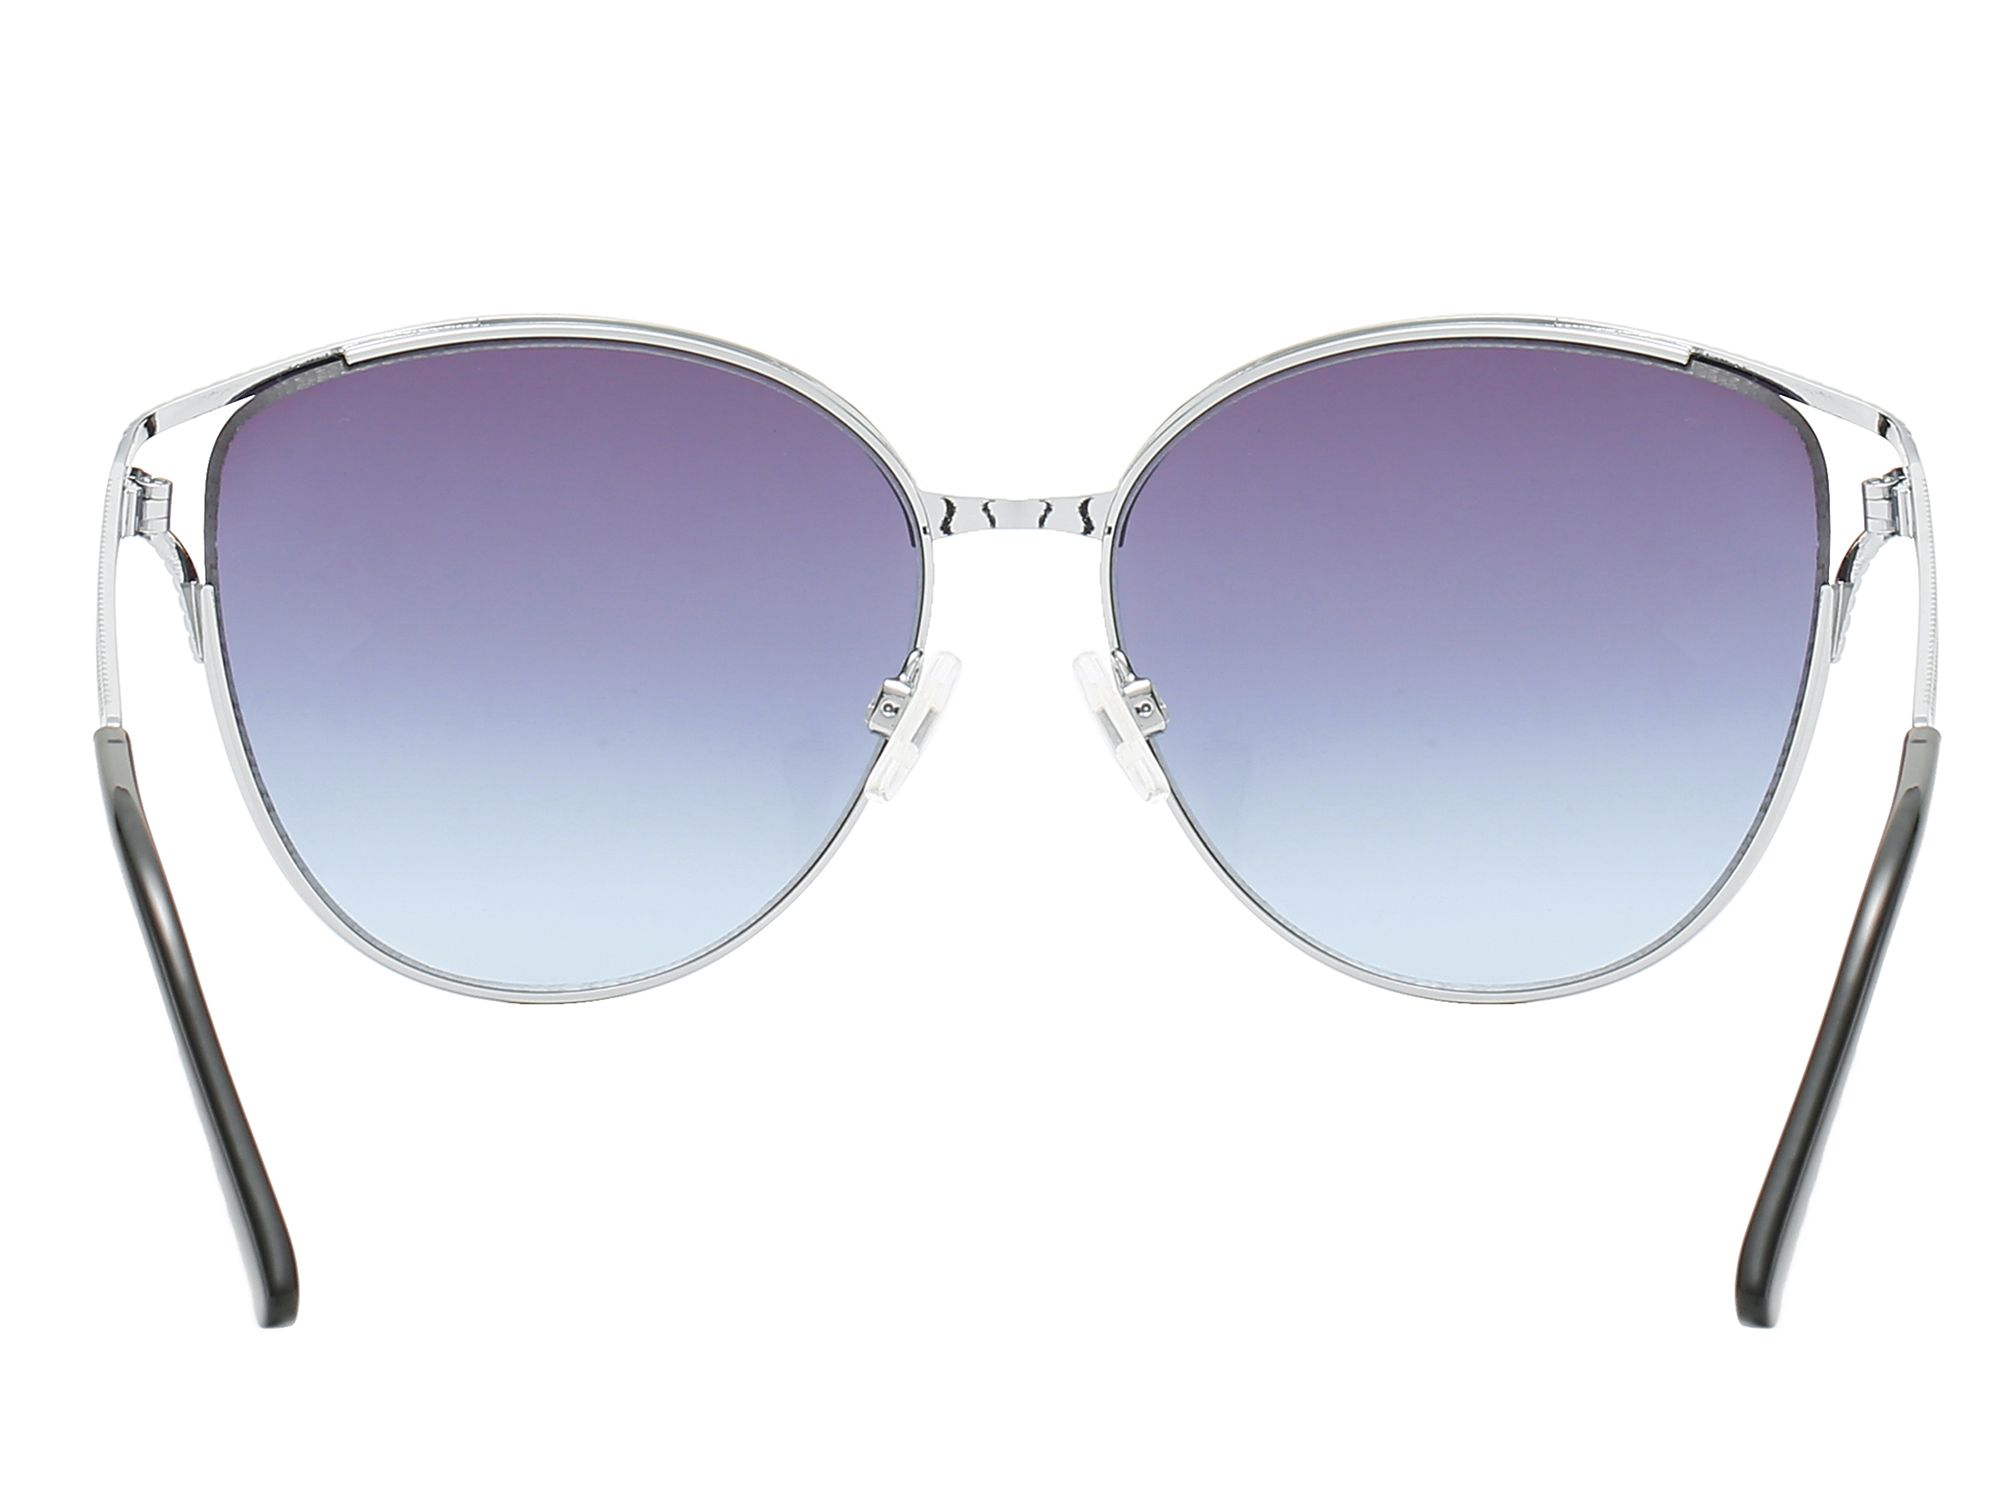 Piranha Women's "Twiggy" Silver Frame Mod Fashion Sunglasses with Purple and Blue Gradient Lens - image 2 of 2